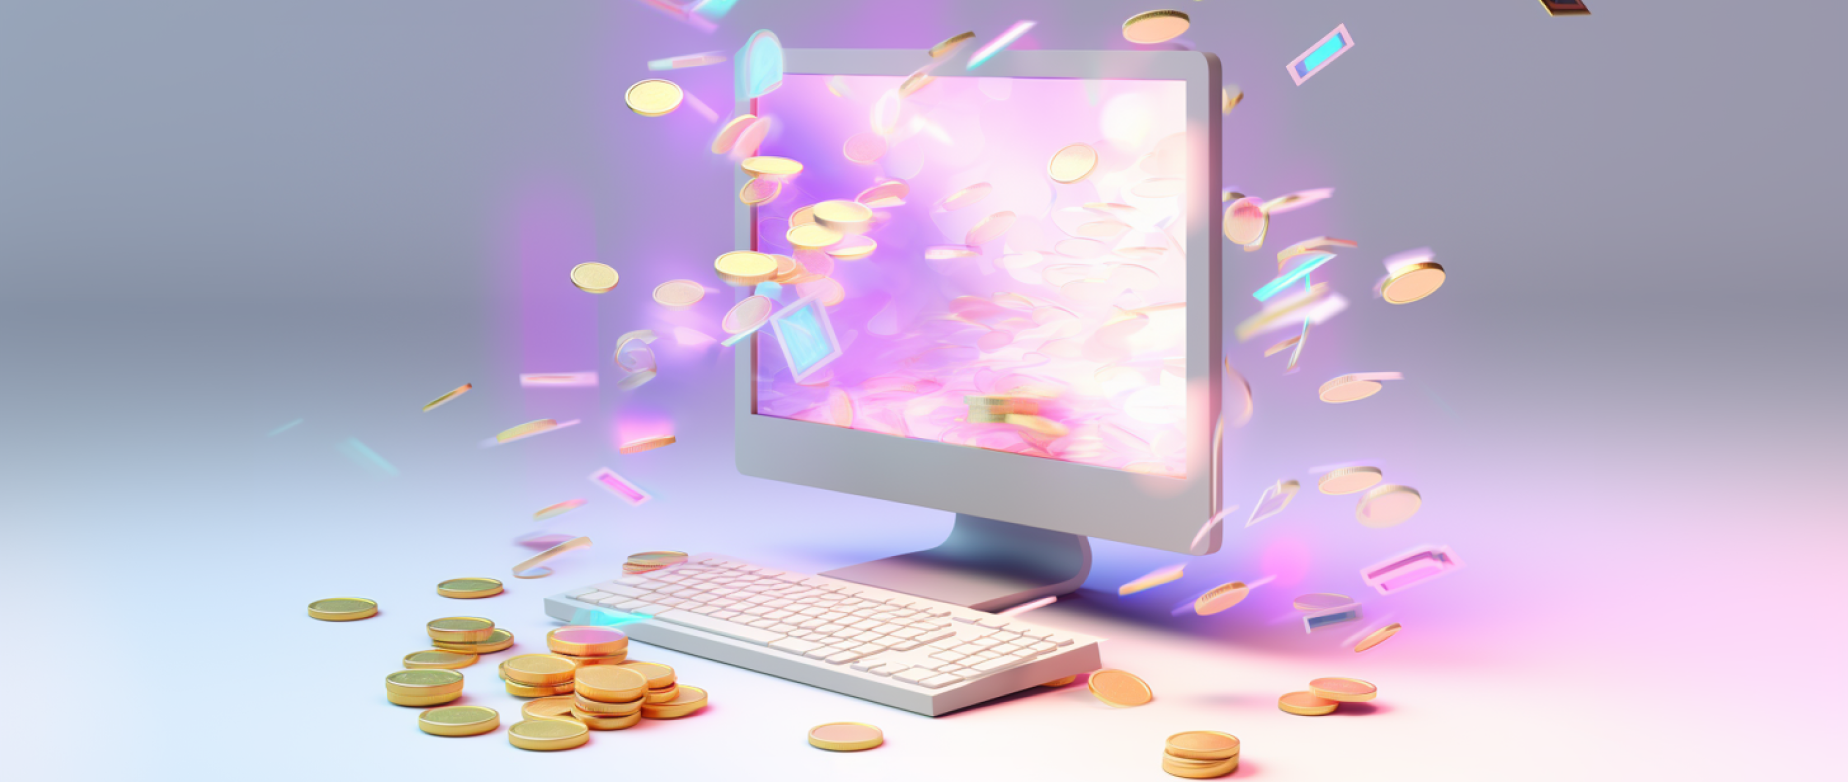 A computer monitor with gold coins bursting from the screen.